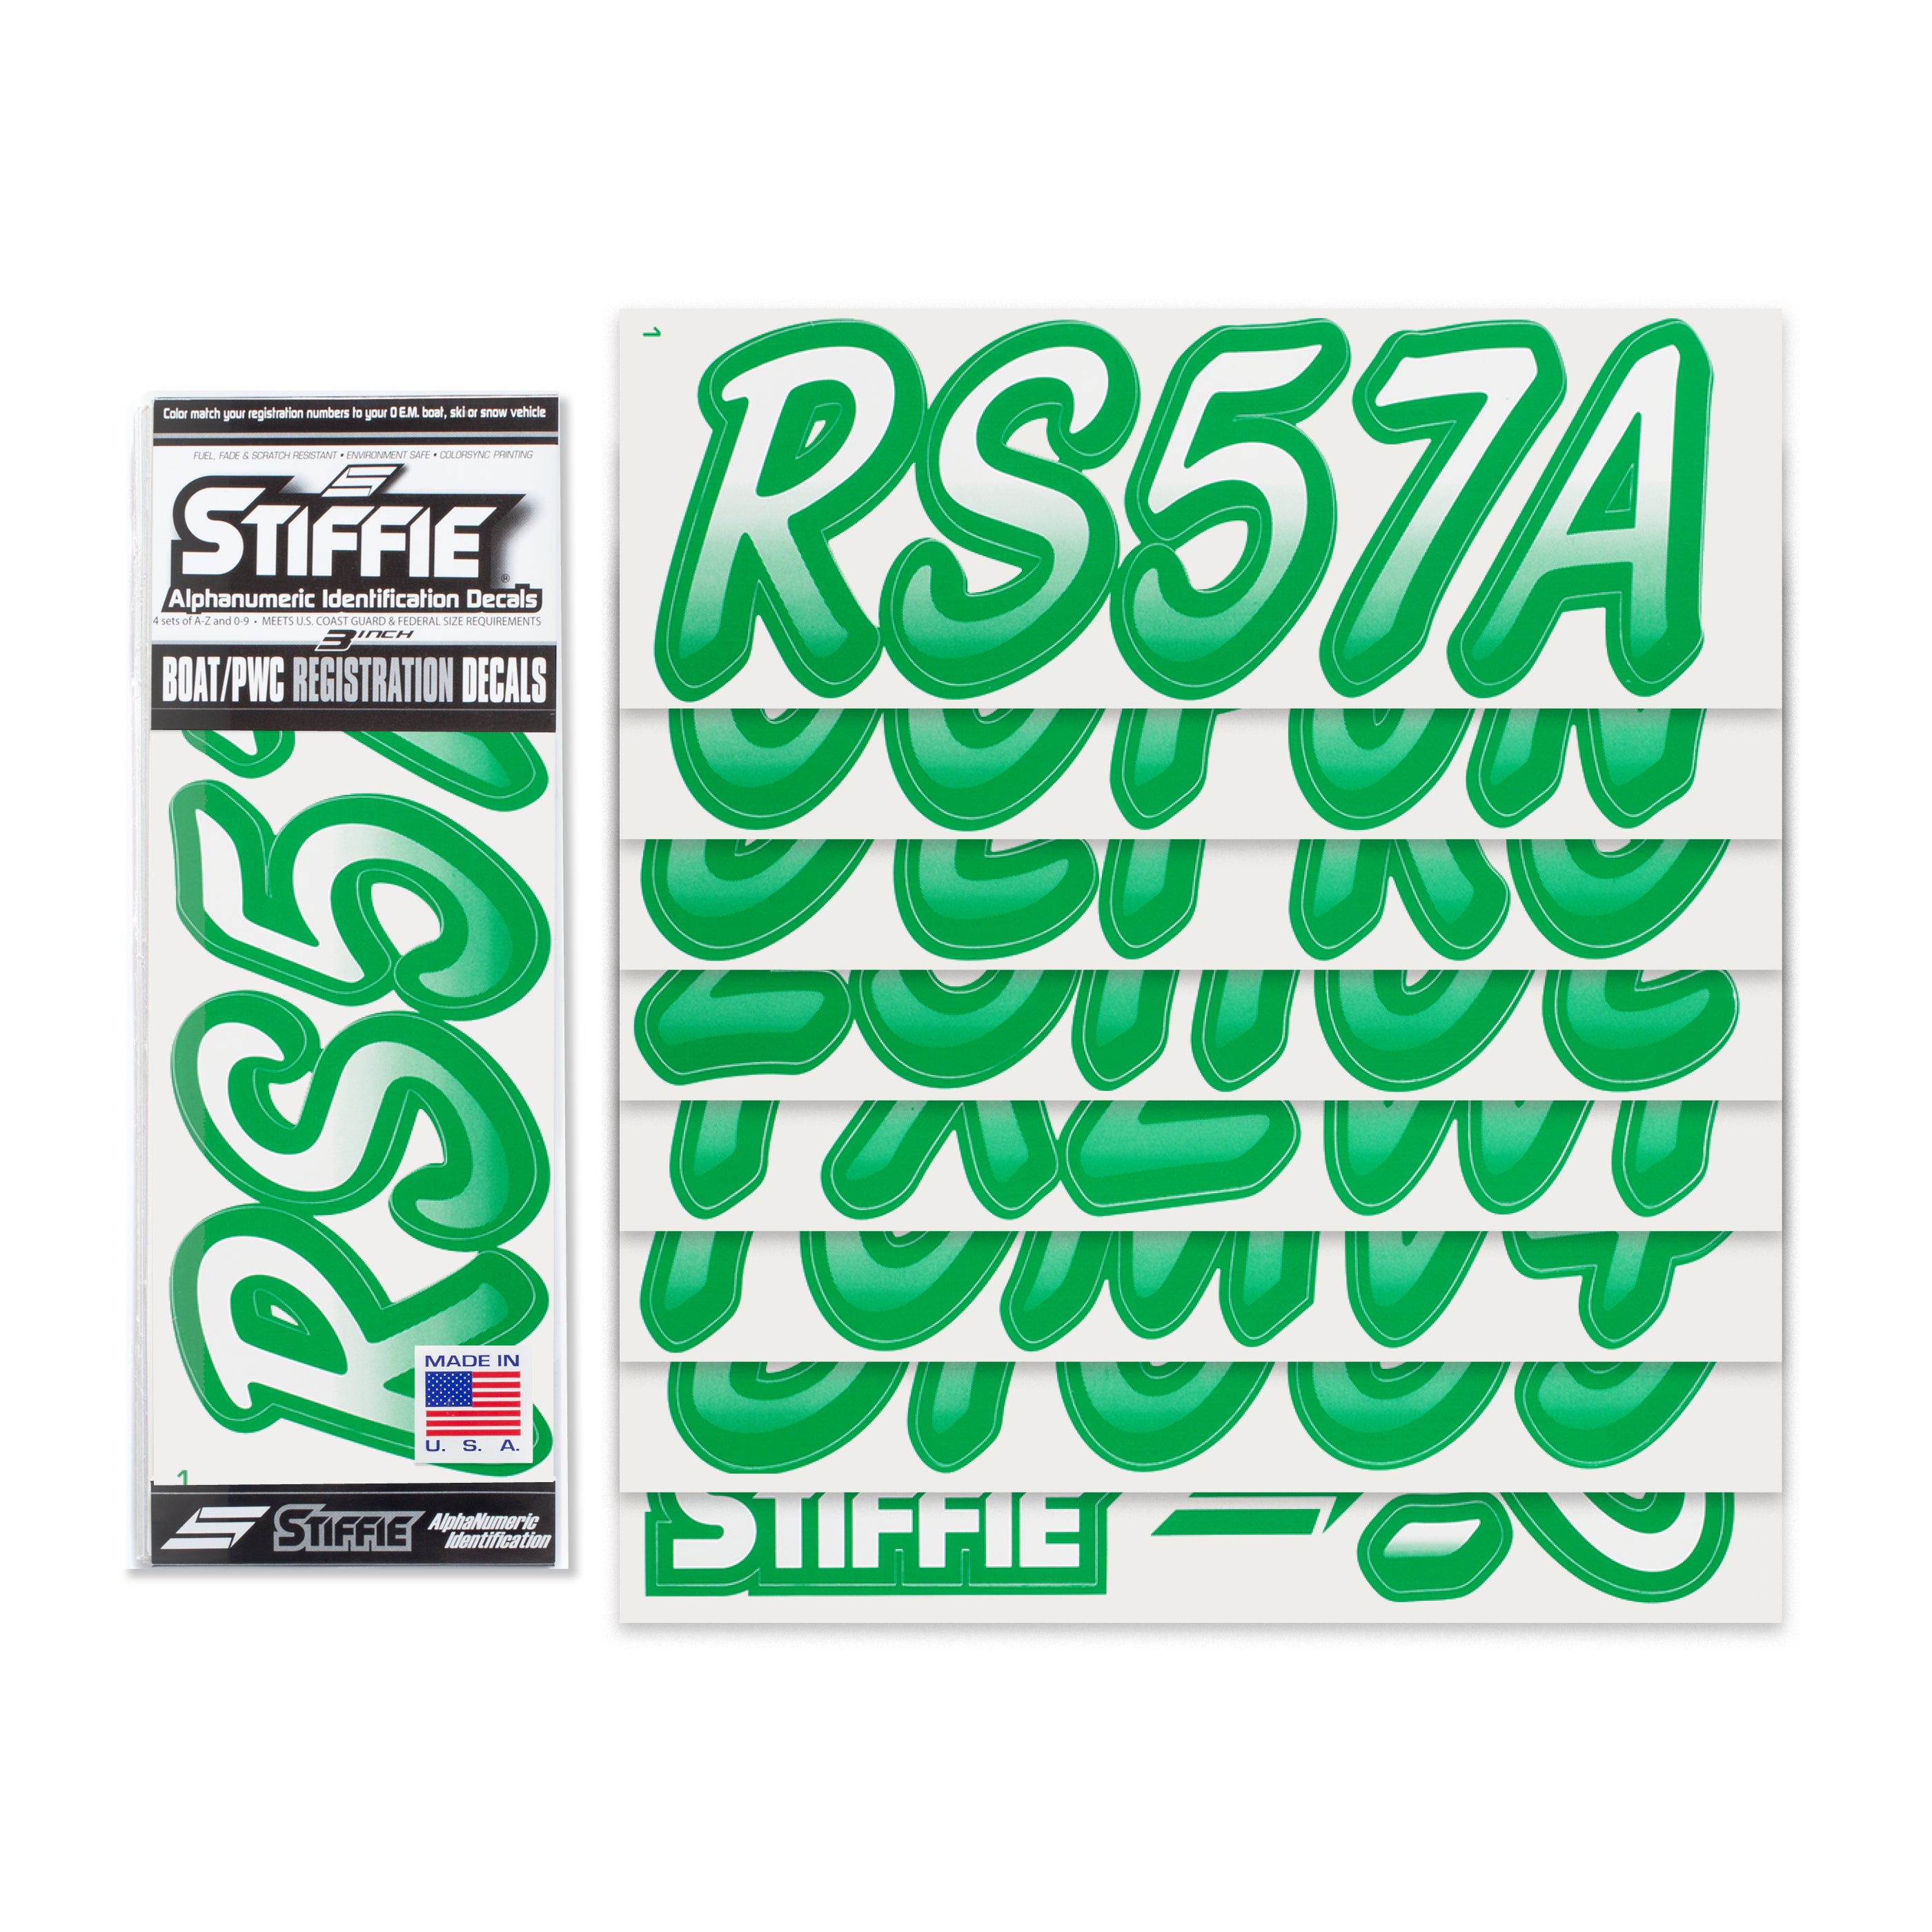 STIFFIE Whipline White/Green 3" Alpha-Numeric Registration Identification Numbers Stickers Decals for Boats & Personal Watercraft